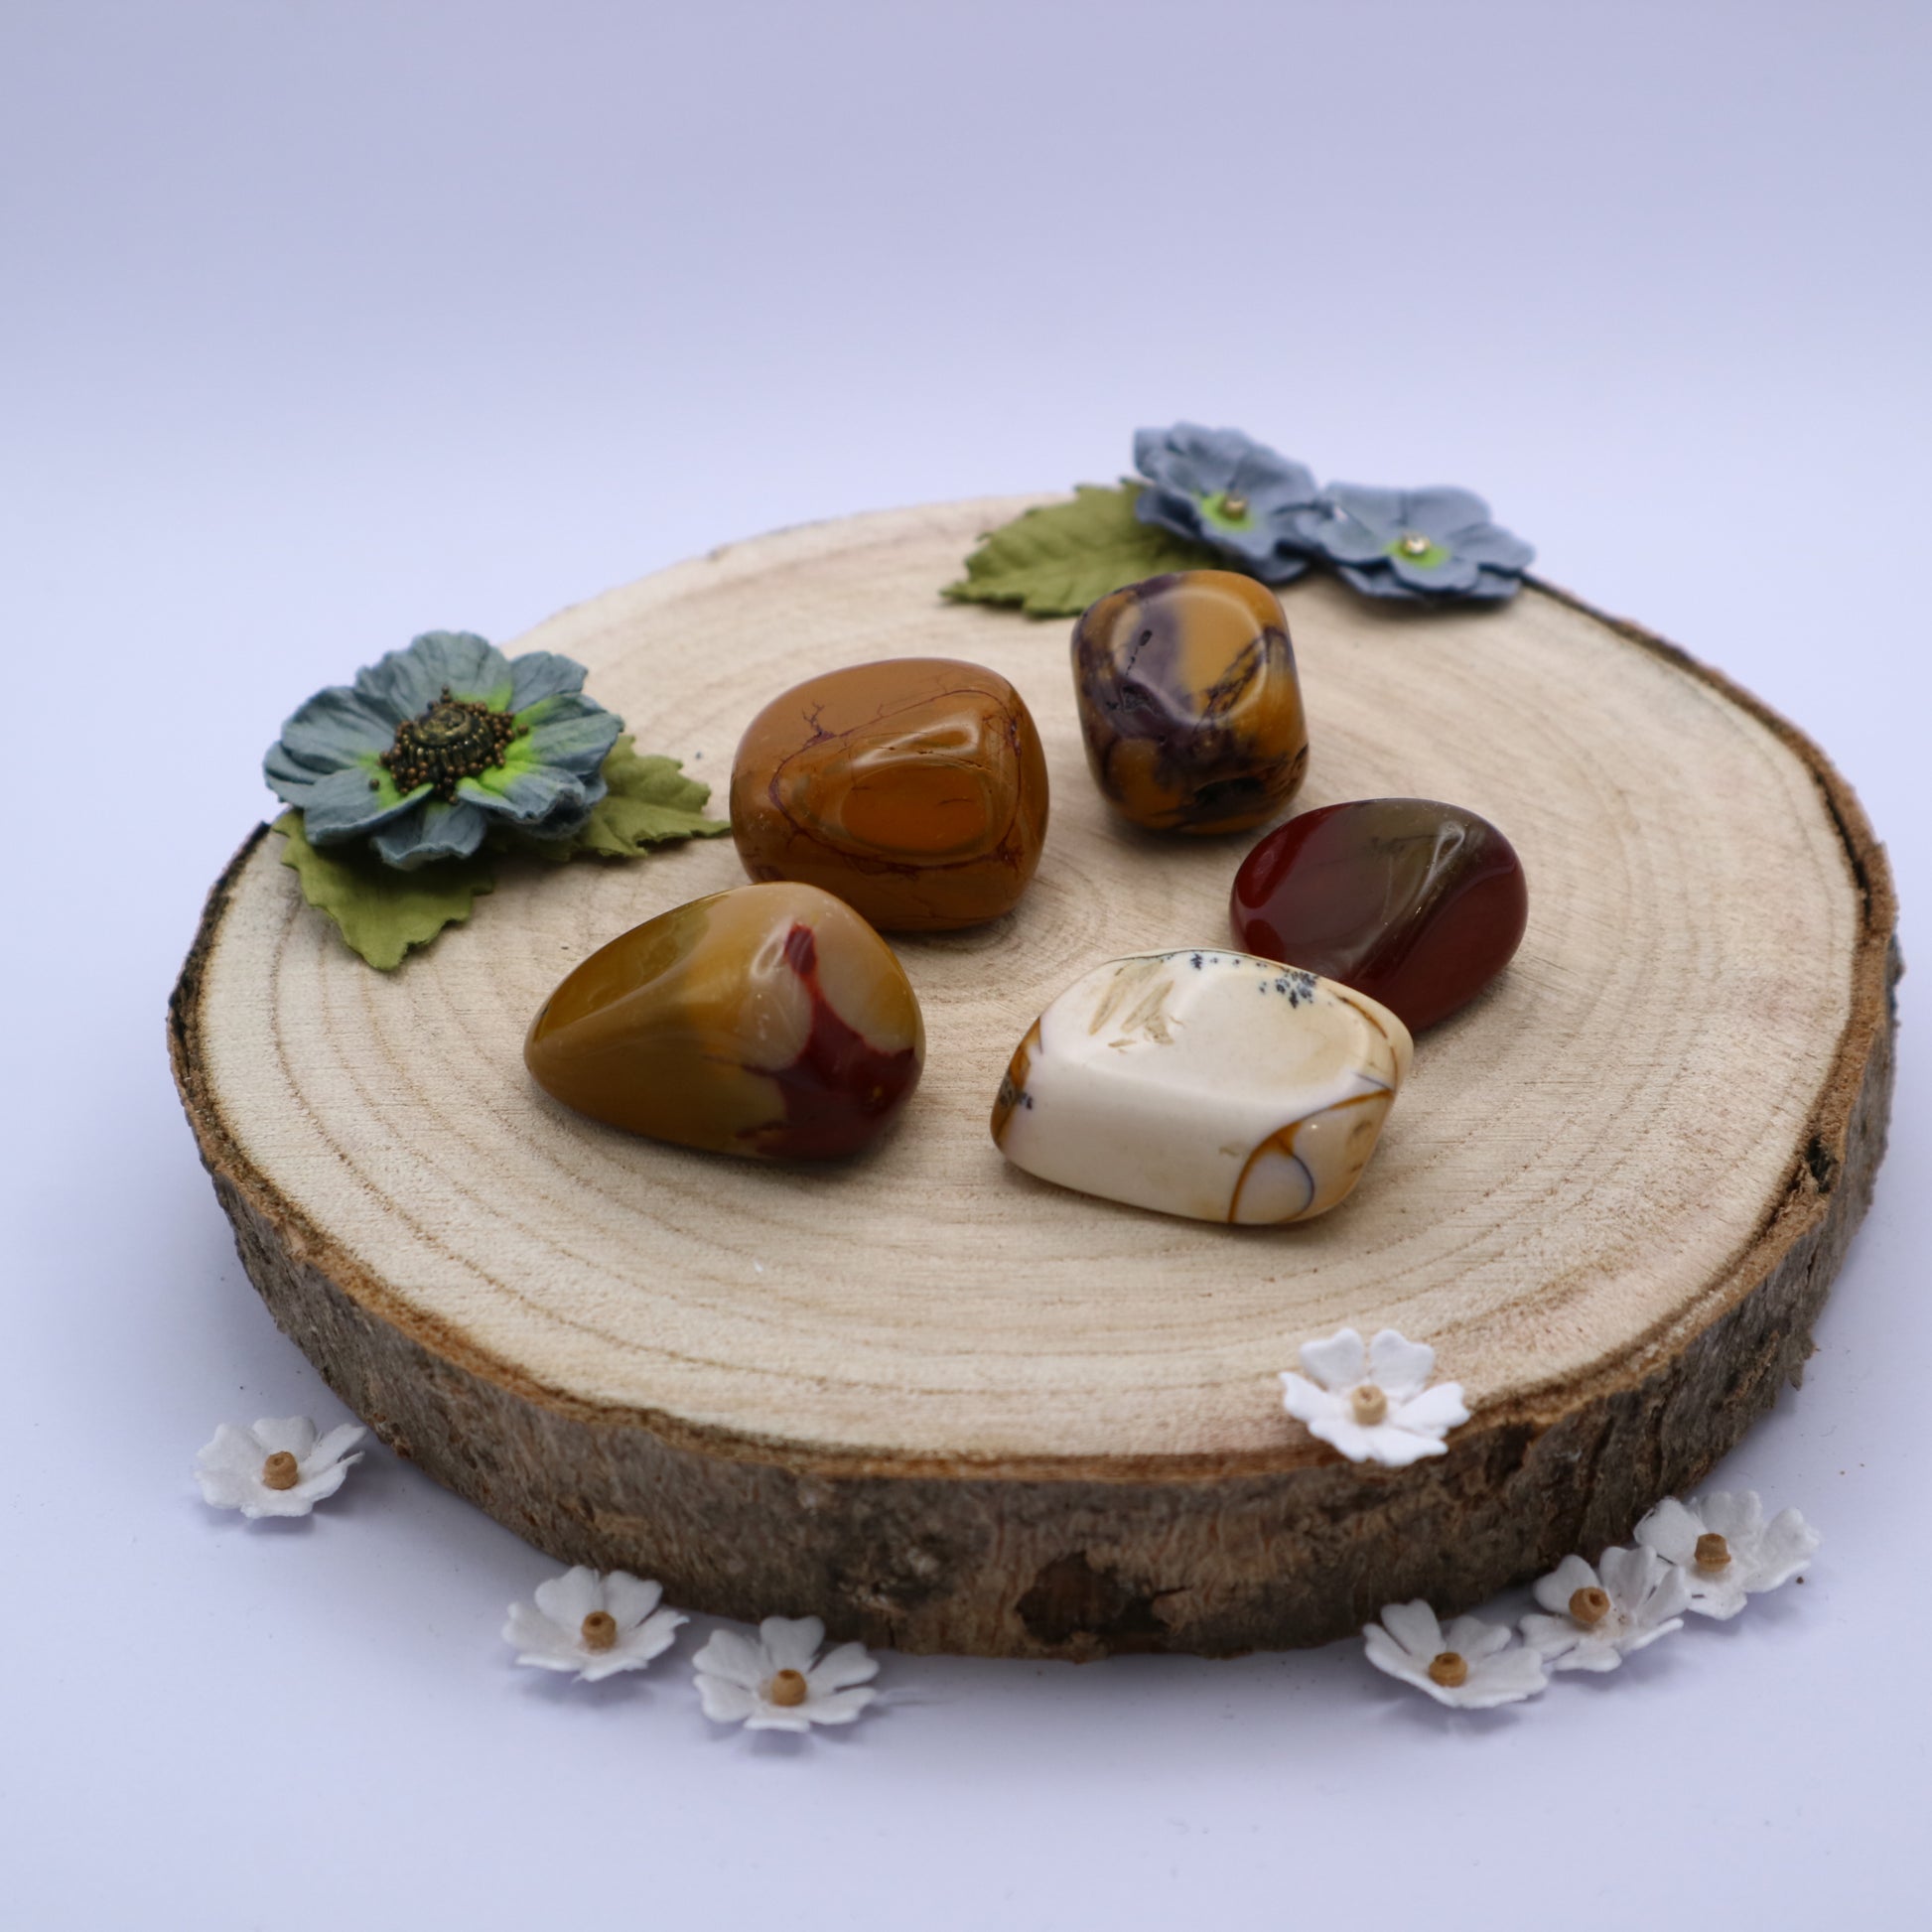 Five pieces of Mookaite crystals displayed on a piece of wood surrounded by flowers